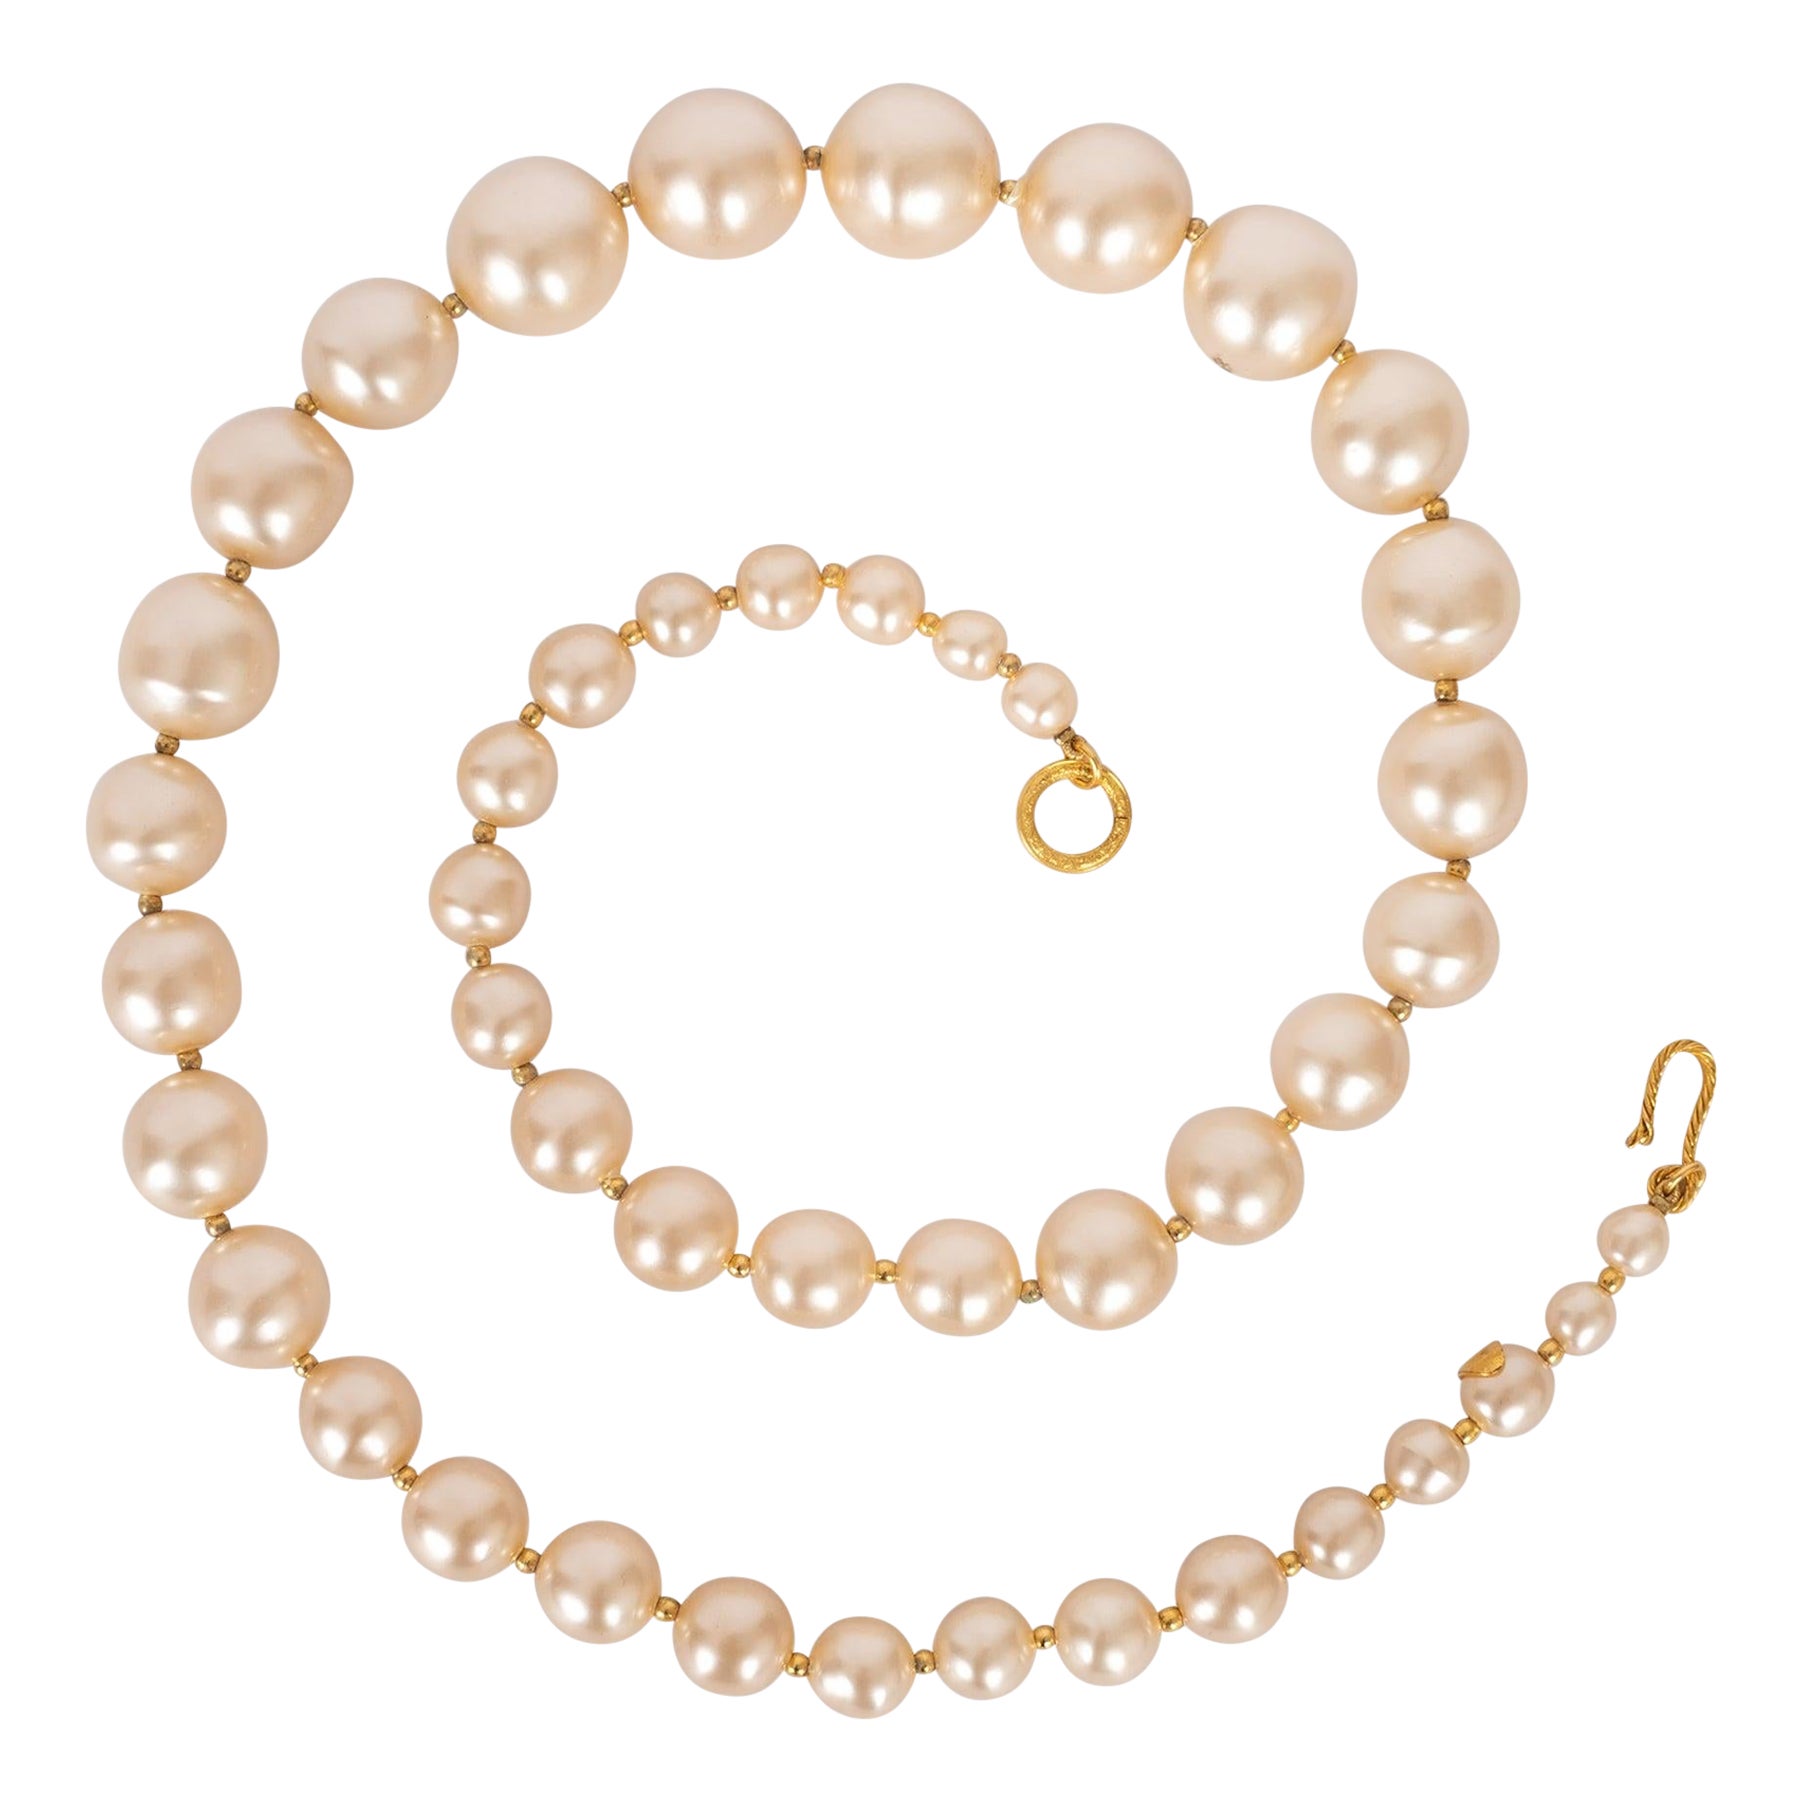 Chanel Necklace in Costume Pearly Beads and Gold-Plated Metal, 1990s For Sale